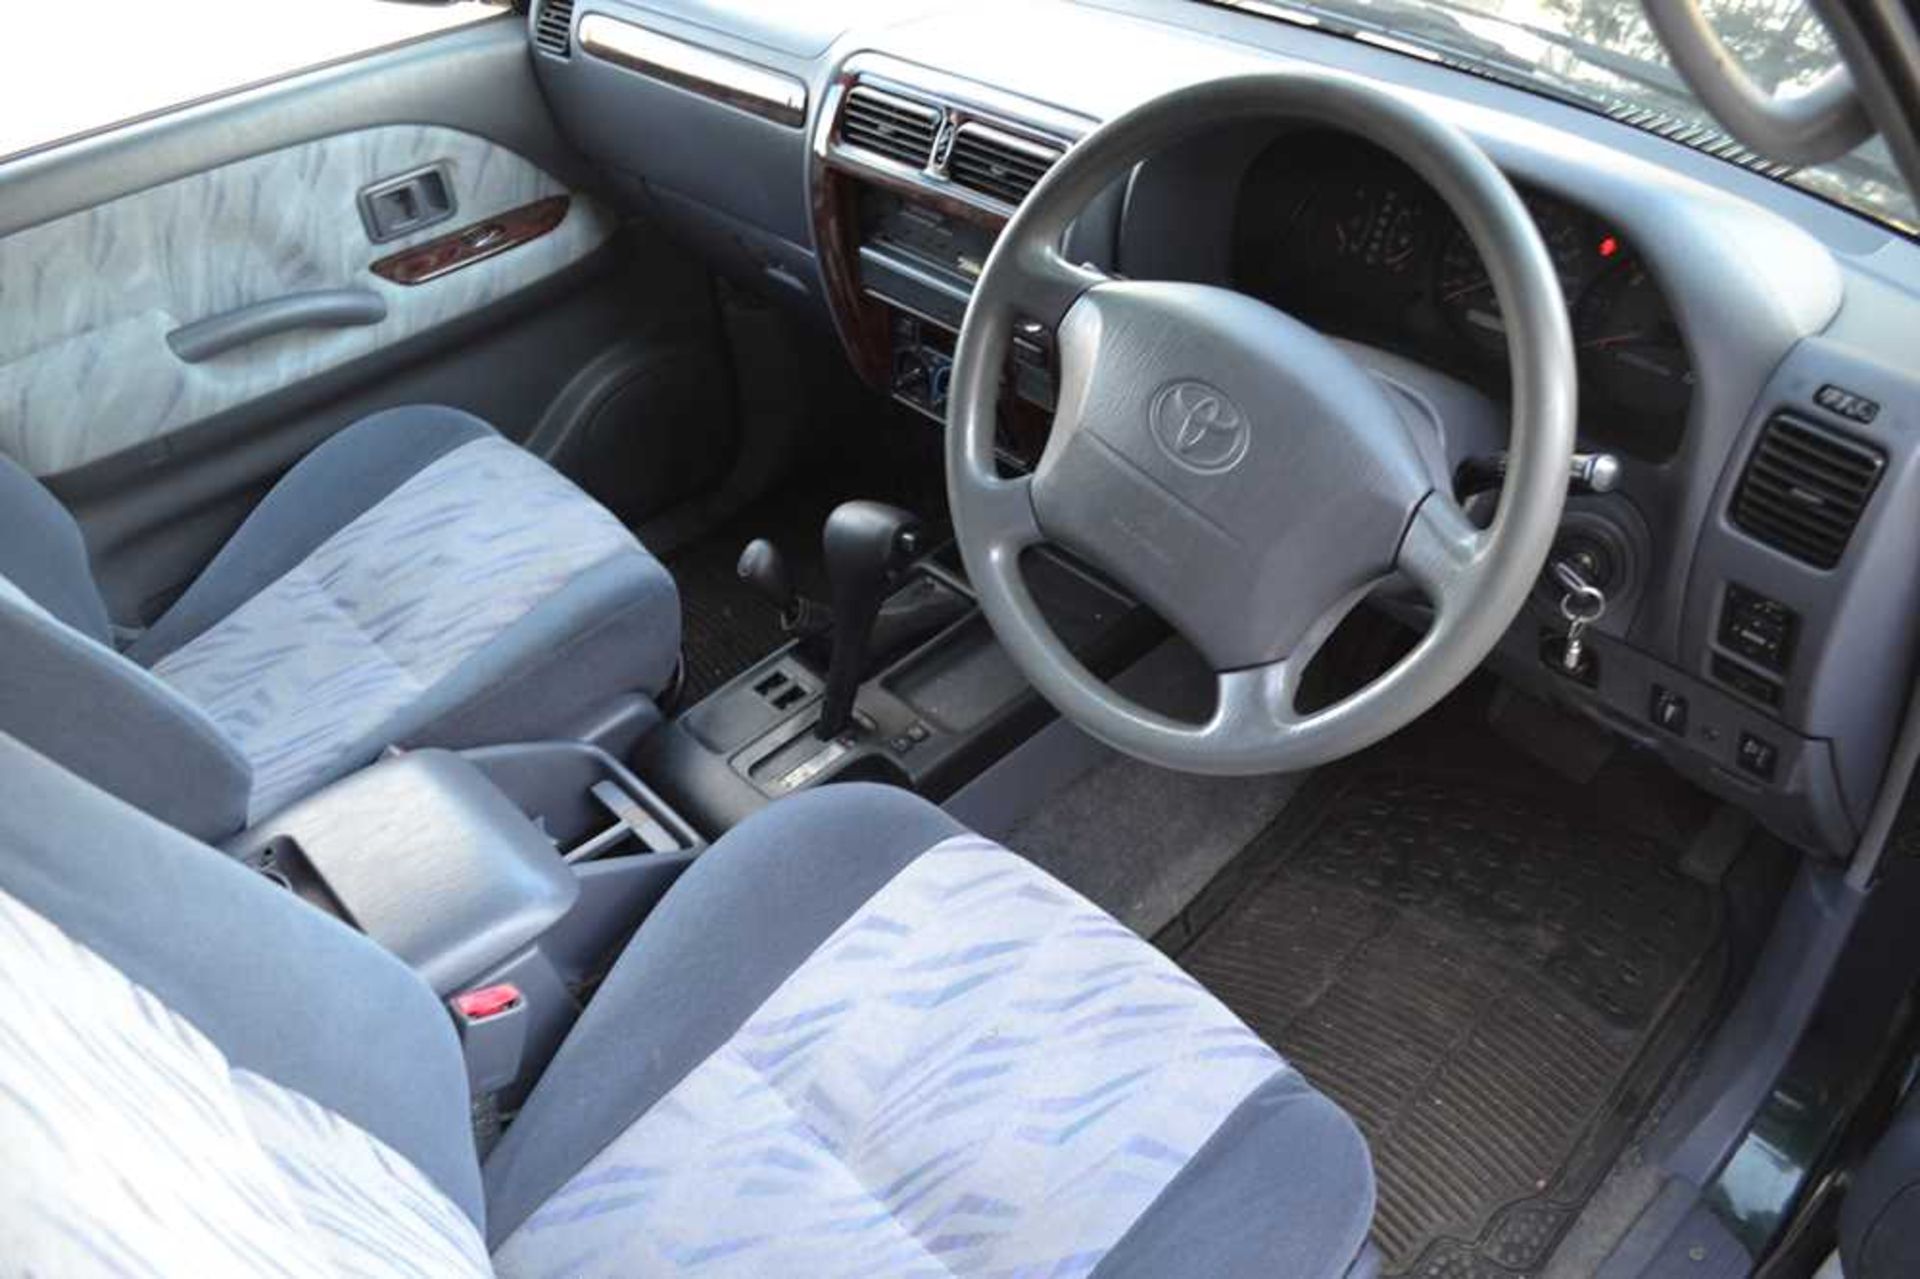 2000 Toyota Land Cruiser Colordao FX No Reserve - Just Two Former Keepers - Image 36 of 49